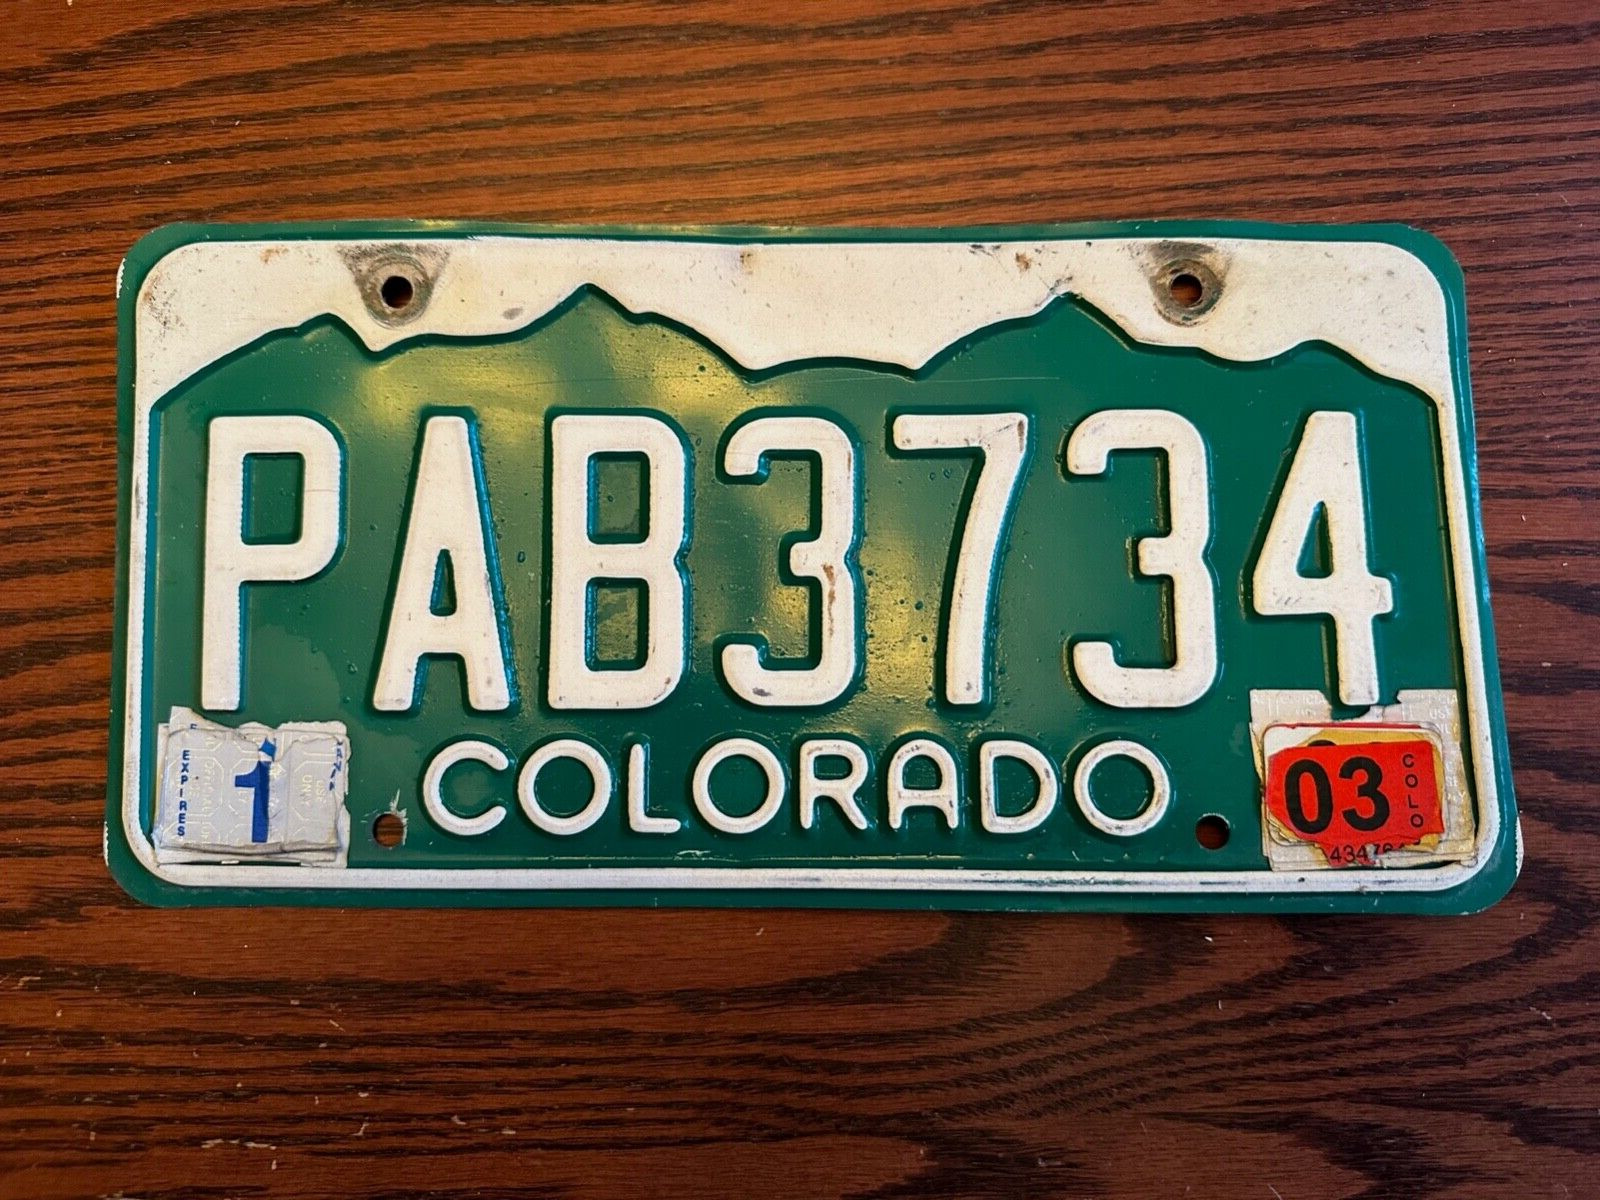 2003 Colorado License Plate PAB3734 Green Mountain CO USA Authentic January